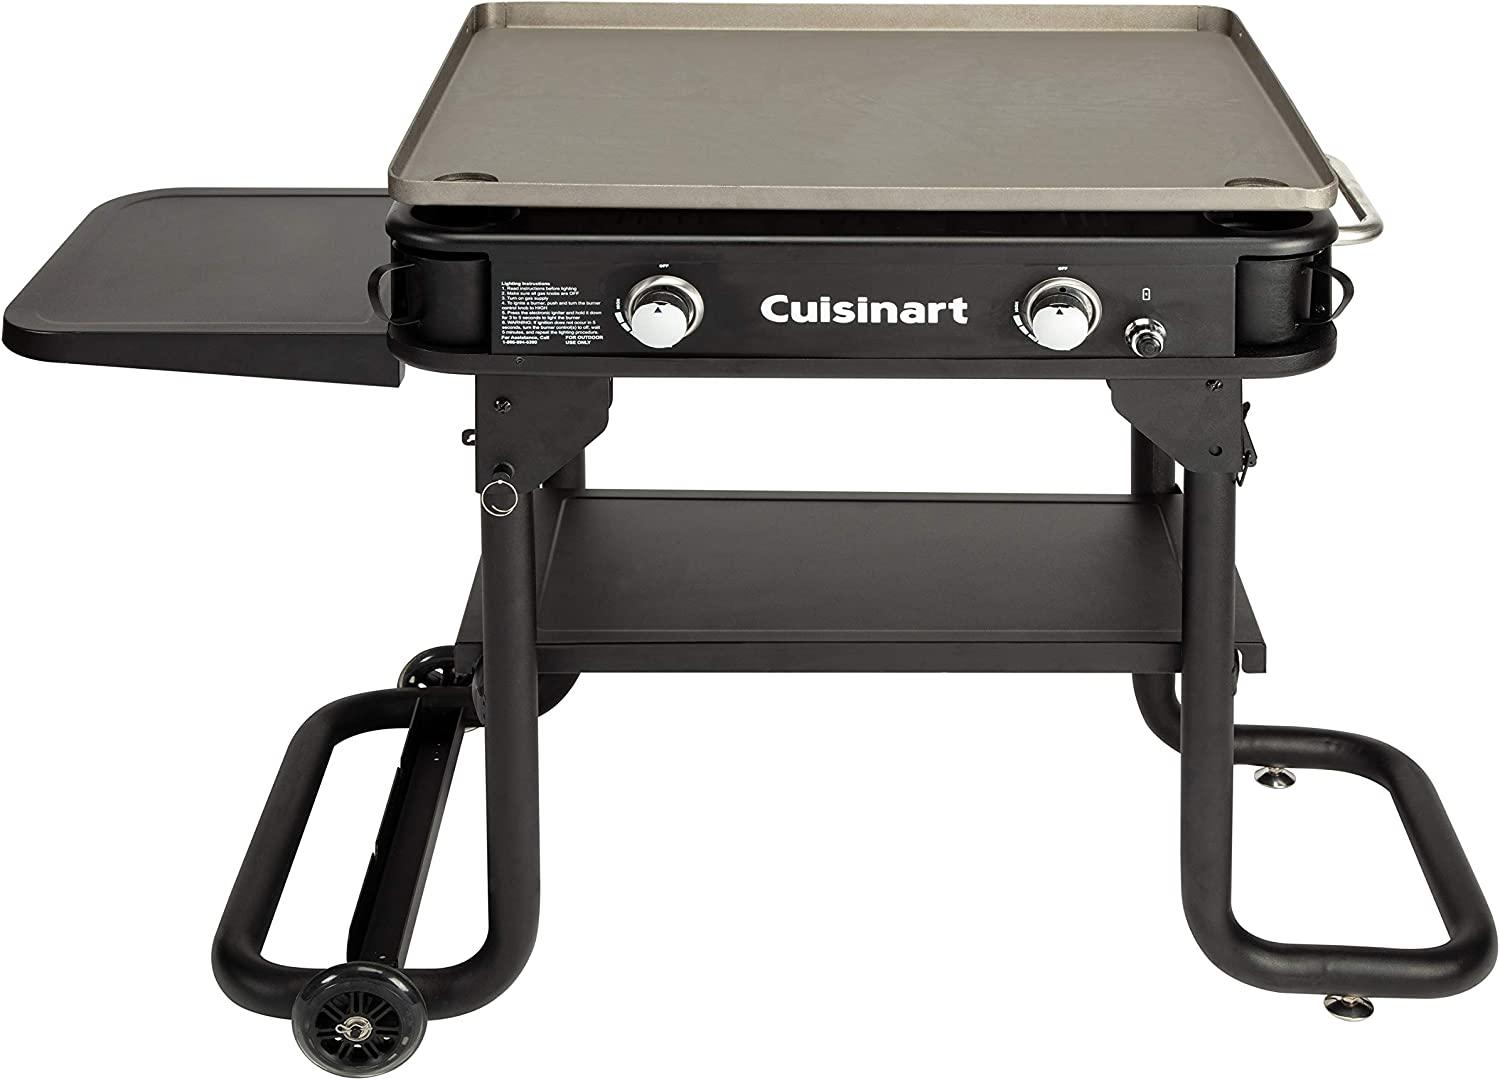 28in Cuisinart Flat Top Propane Two Burner Gas Griddle CGG-0028 for $91.21 Shipped